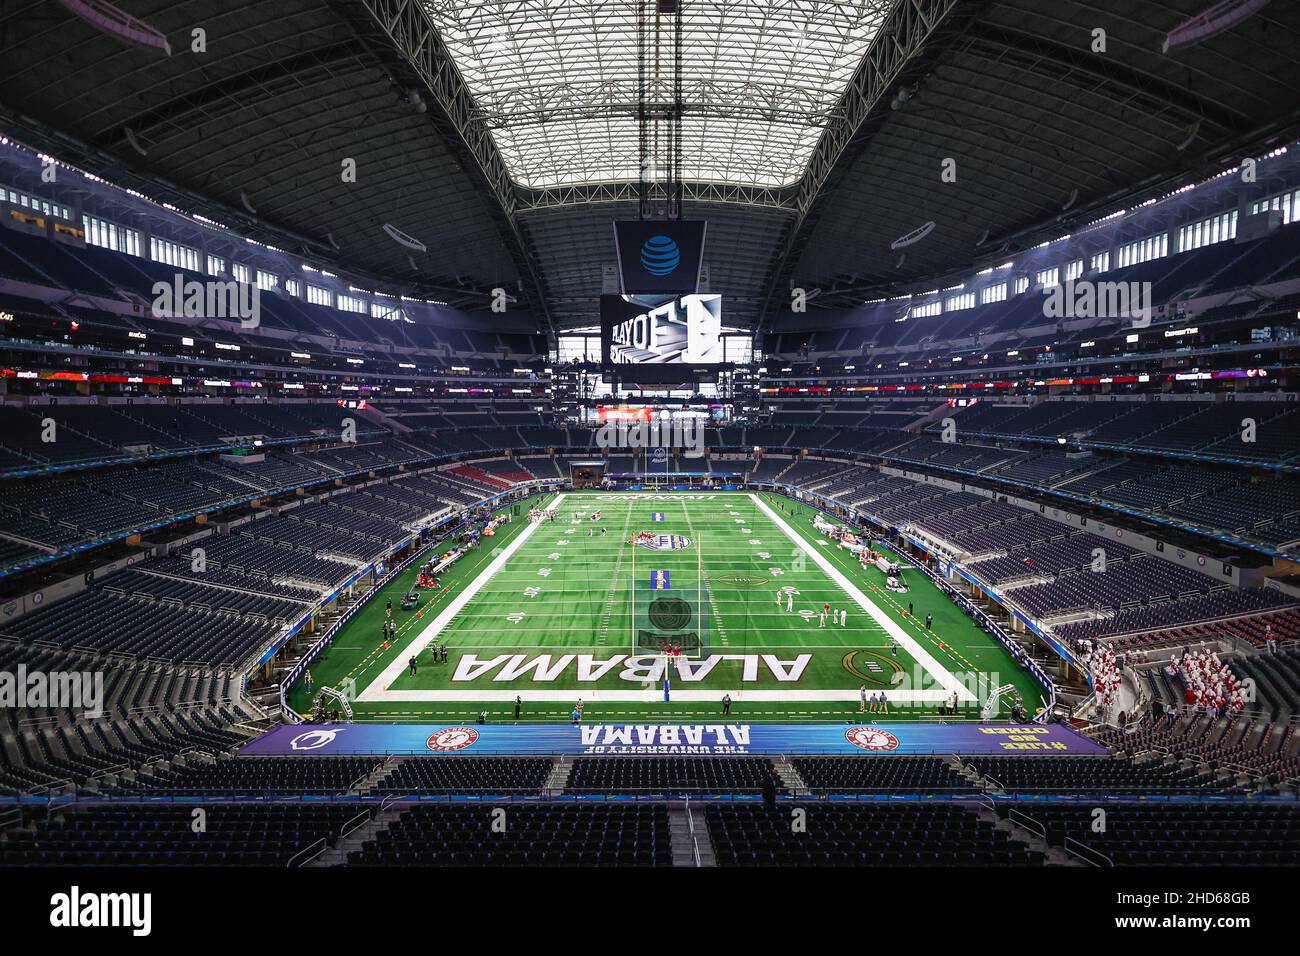 A general view of AT&T Stadium before the College Football Playoff game between the Alabama Crimson Tide and the Cincinnati Bearcats in Arlington, Tex Stock Photo